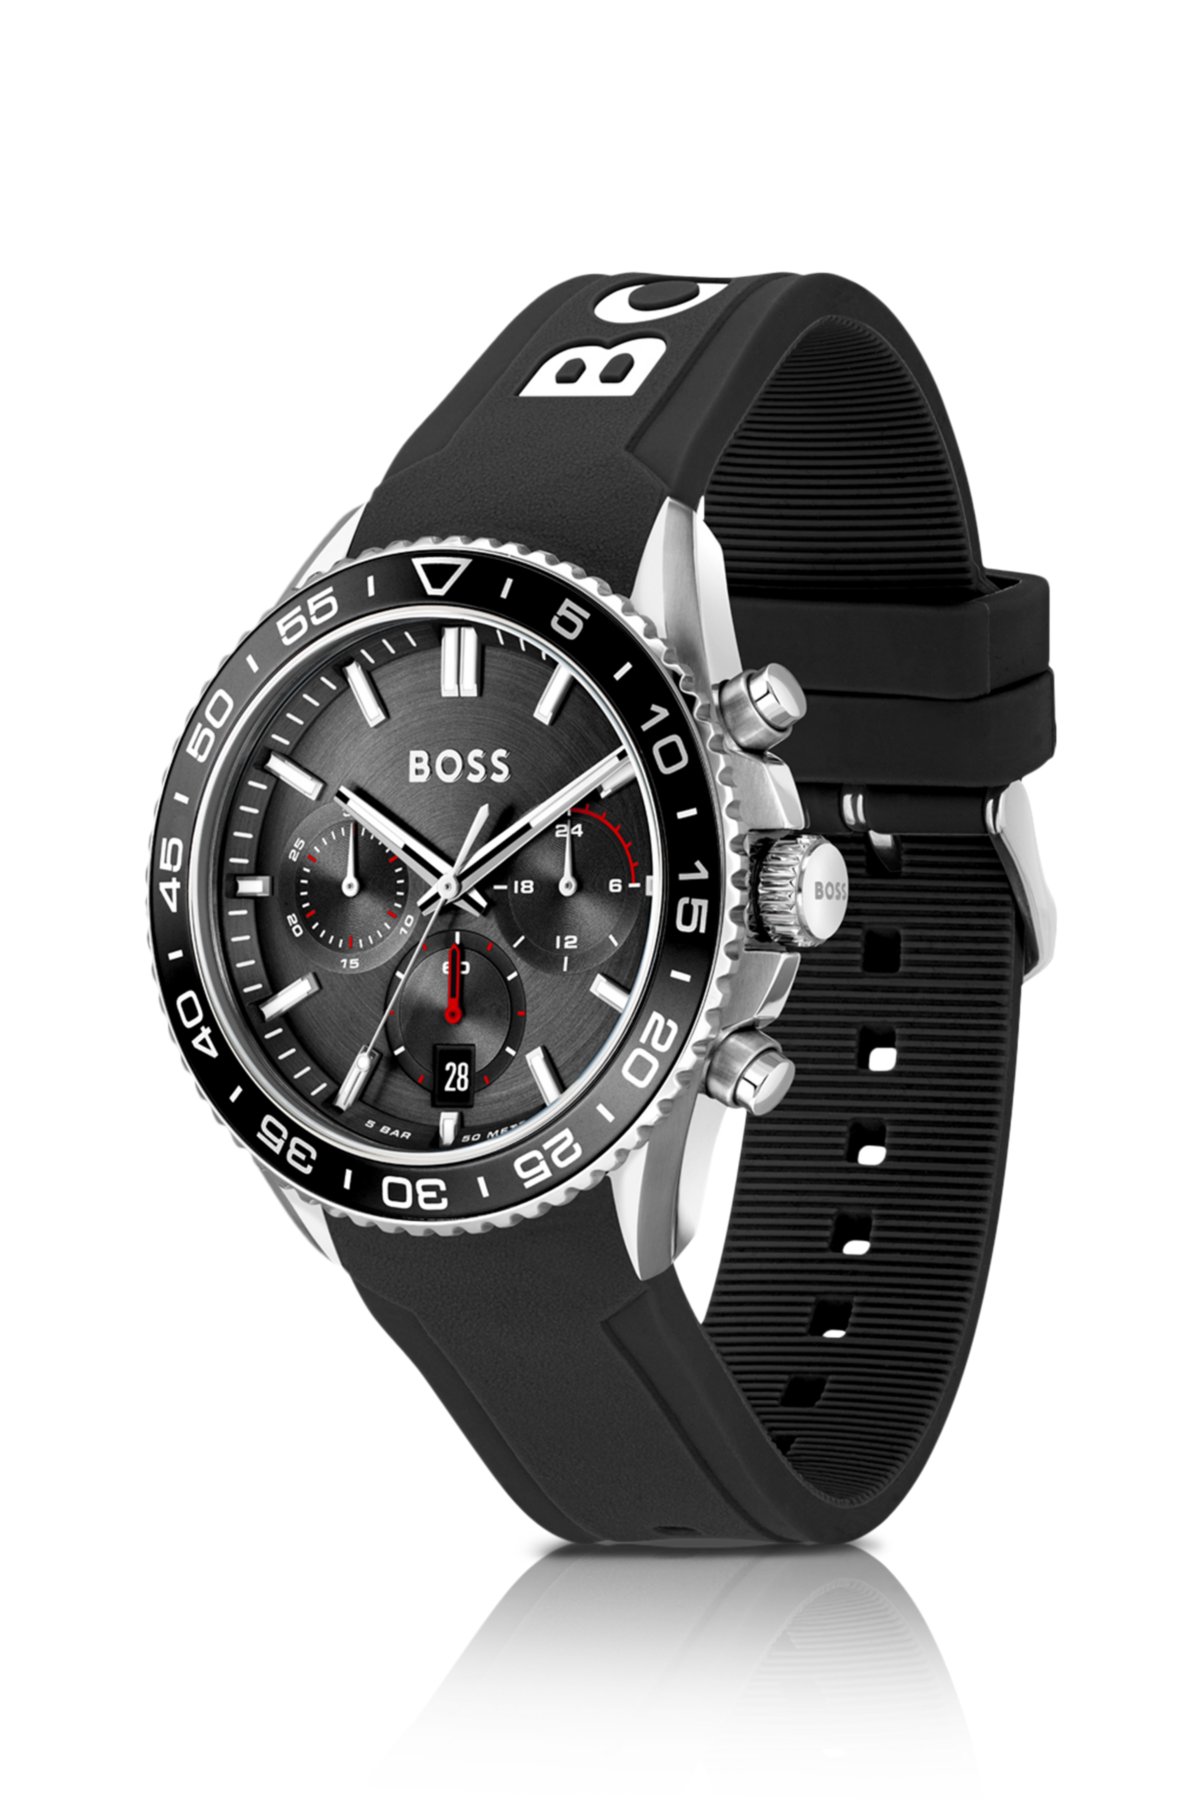 Silicone-strap chronograph watch with black dial, Black